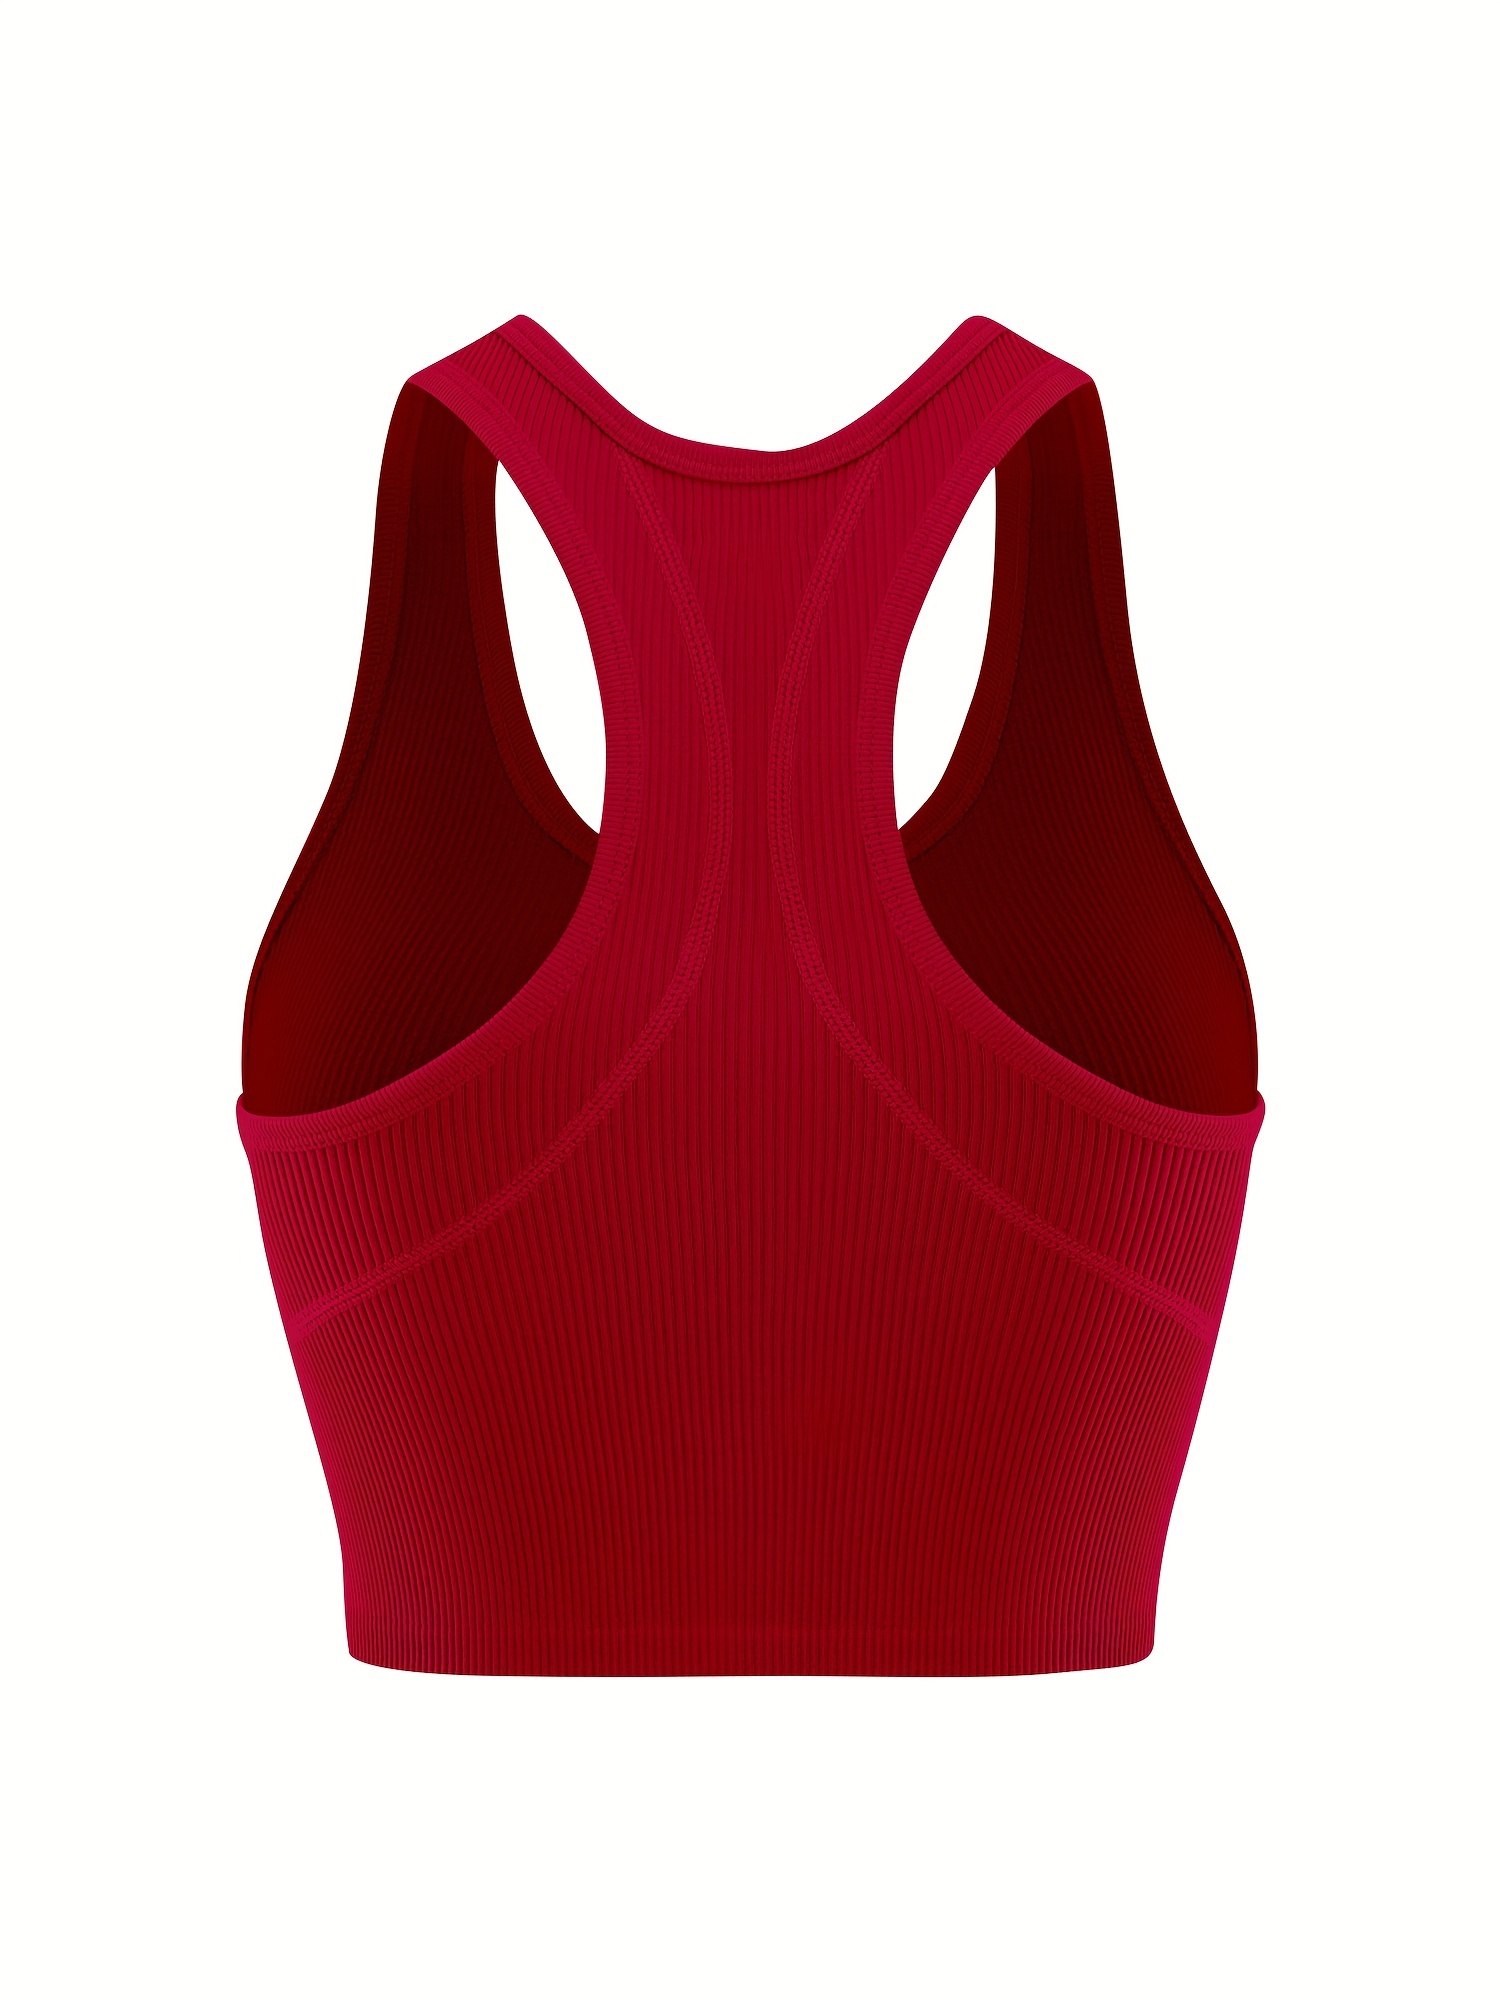 Basic Crop Tops Racerback Yoga Sports Vest For Women, Gym Seamless Ribbed  Knit Sleeveless Casual Tank Tops, Women‘s Tops